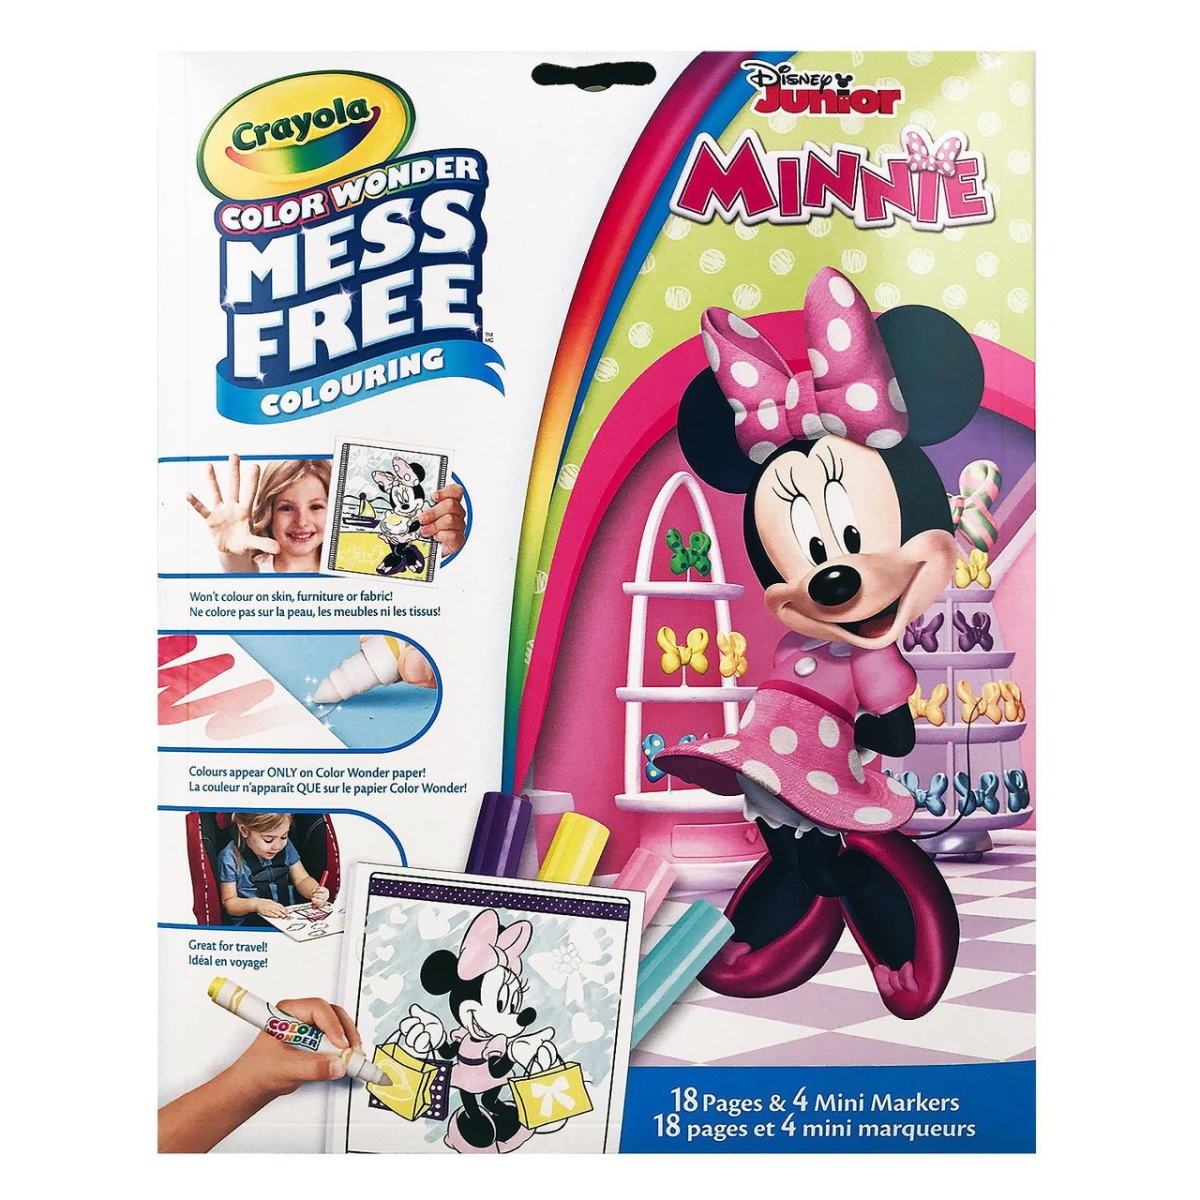 Picture of Crayola 30369415 Color Wonder Mess Free Colouring Minnie Mouse - 18 Pages & 4 Mini Markers